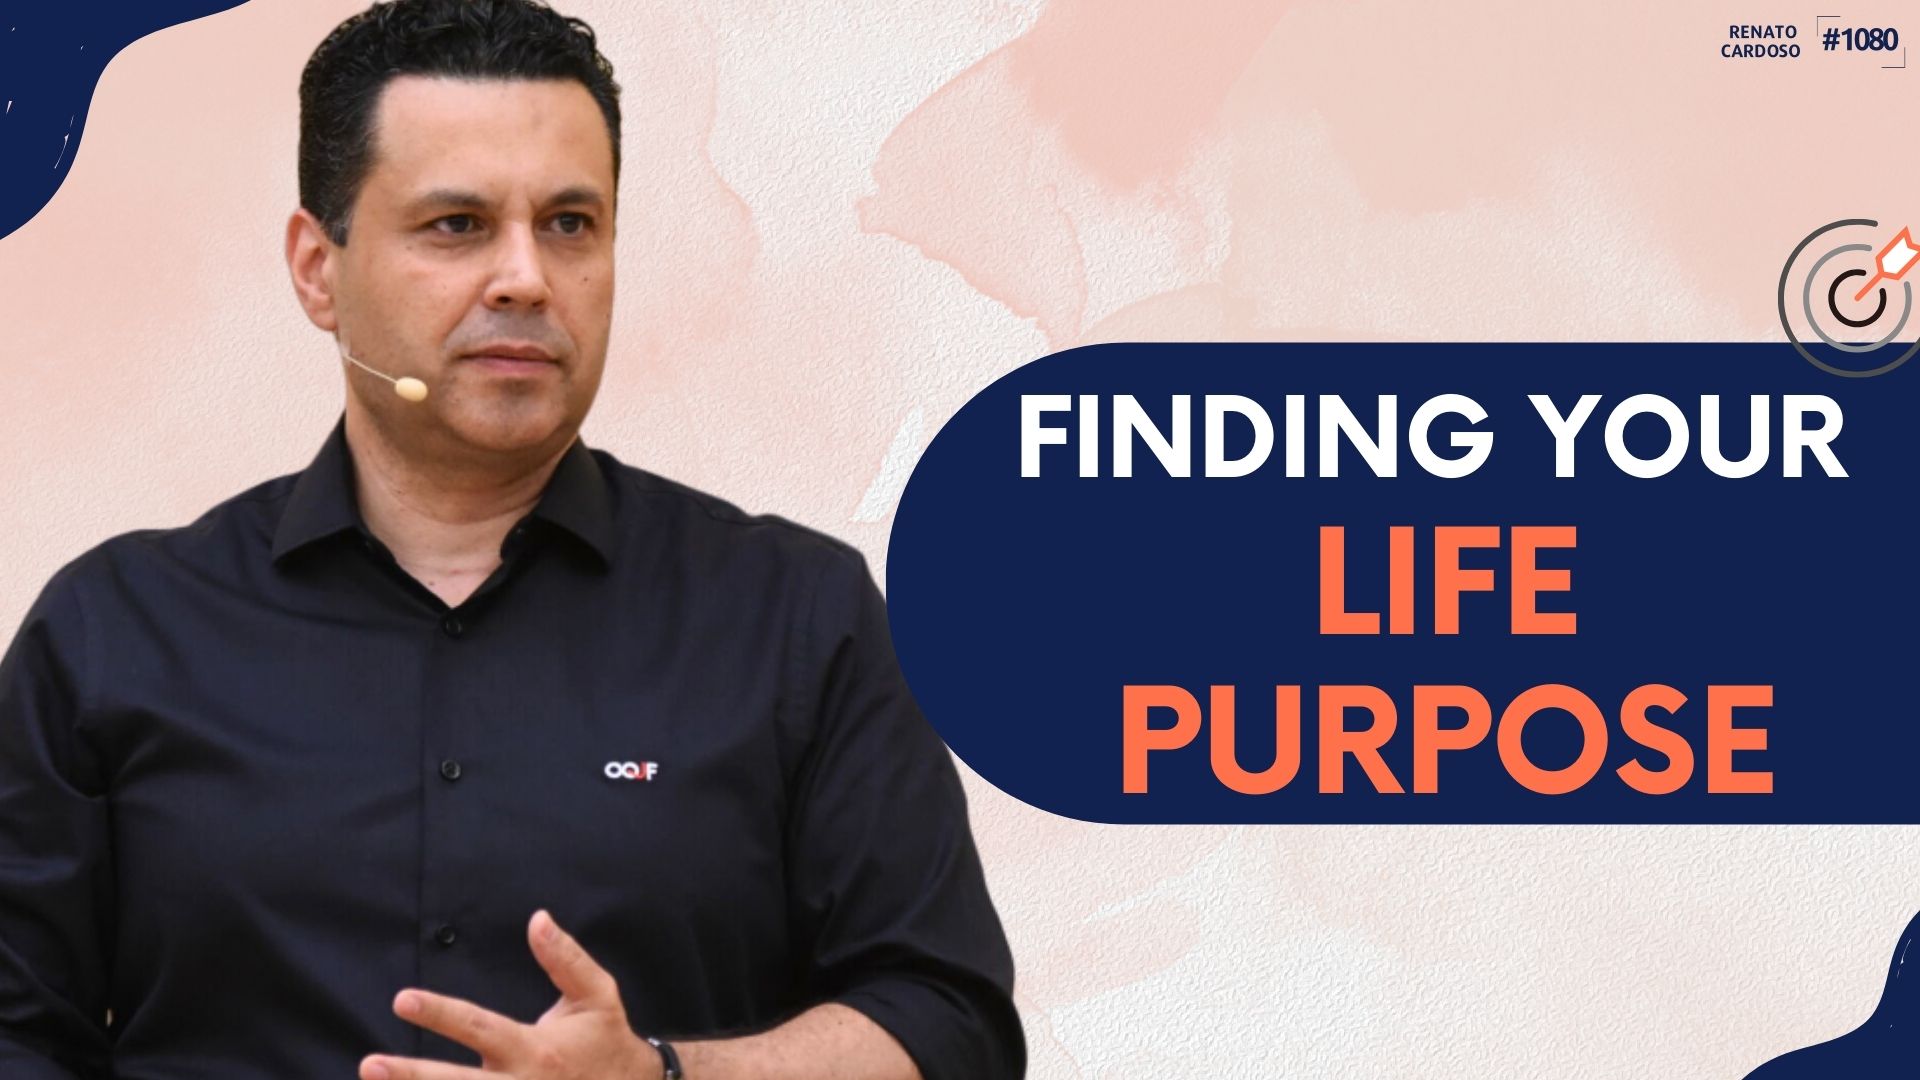 1080_FINDING YOUR LIFE PURPOSE _ #1080